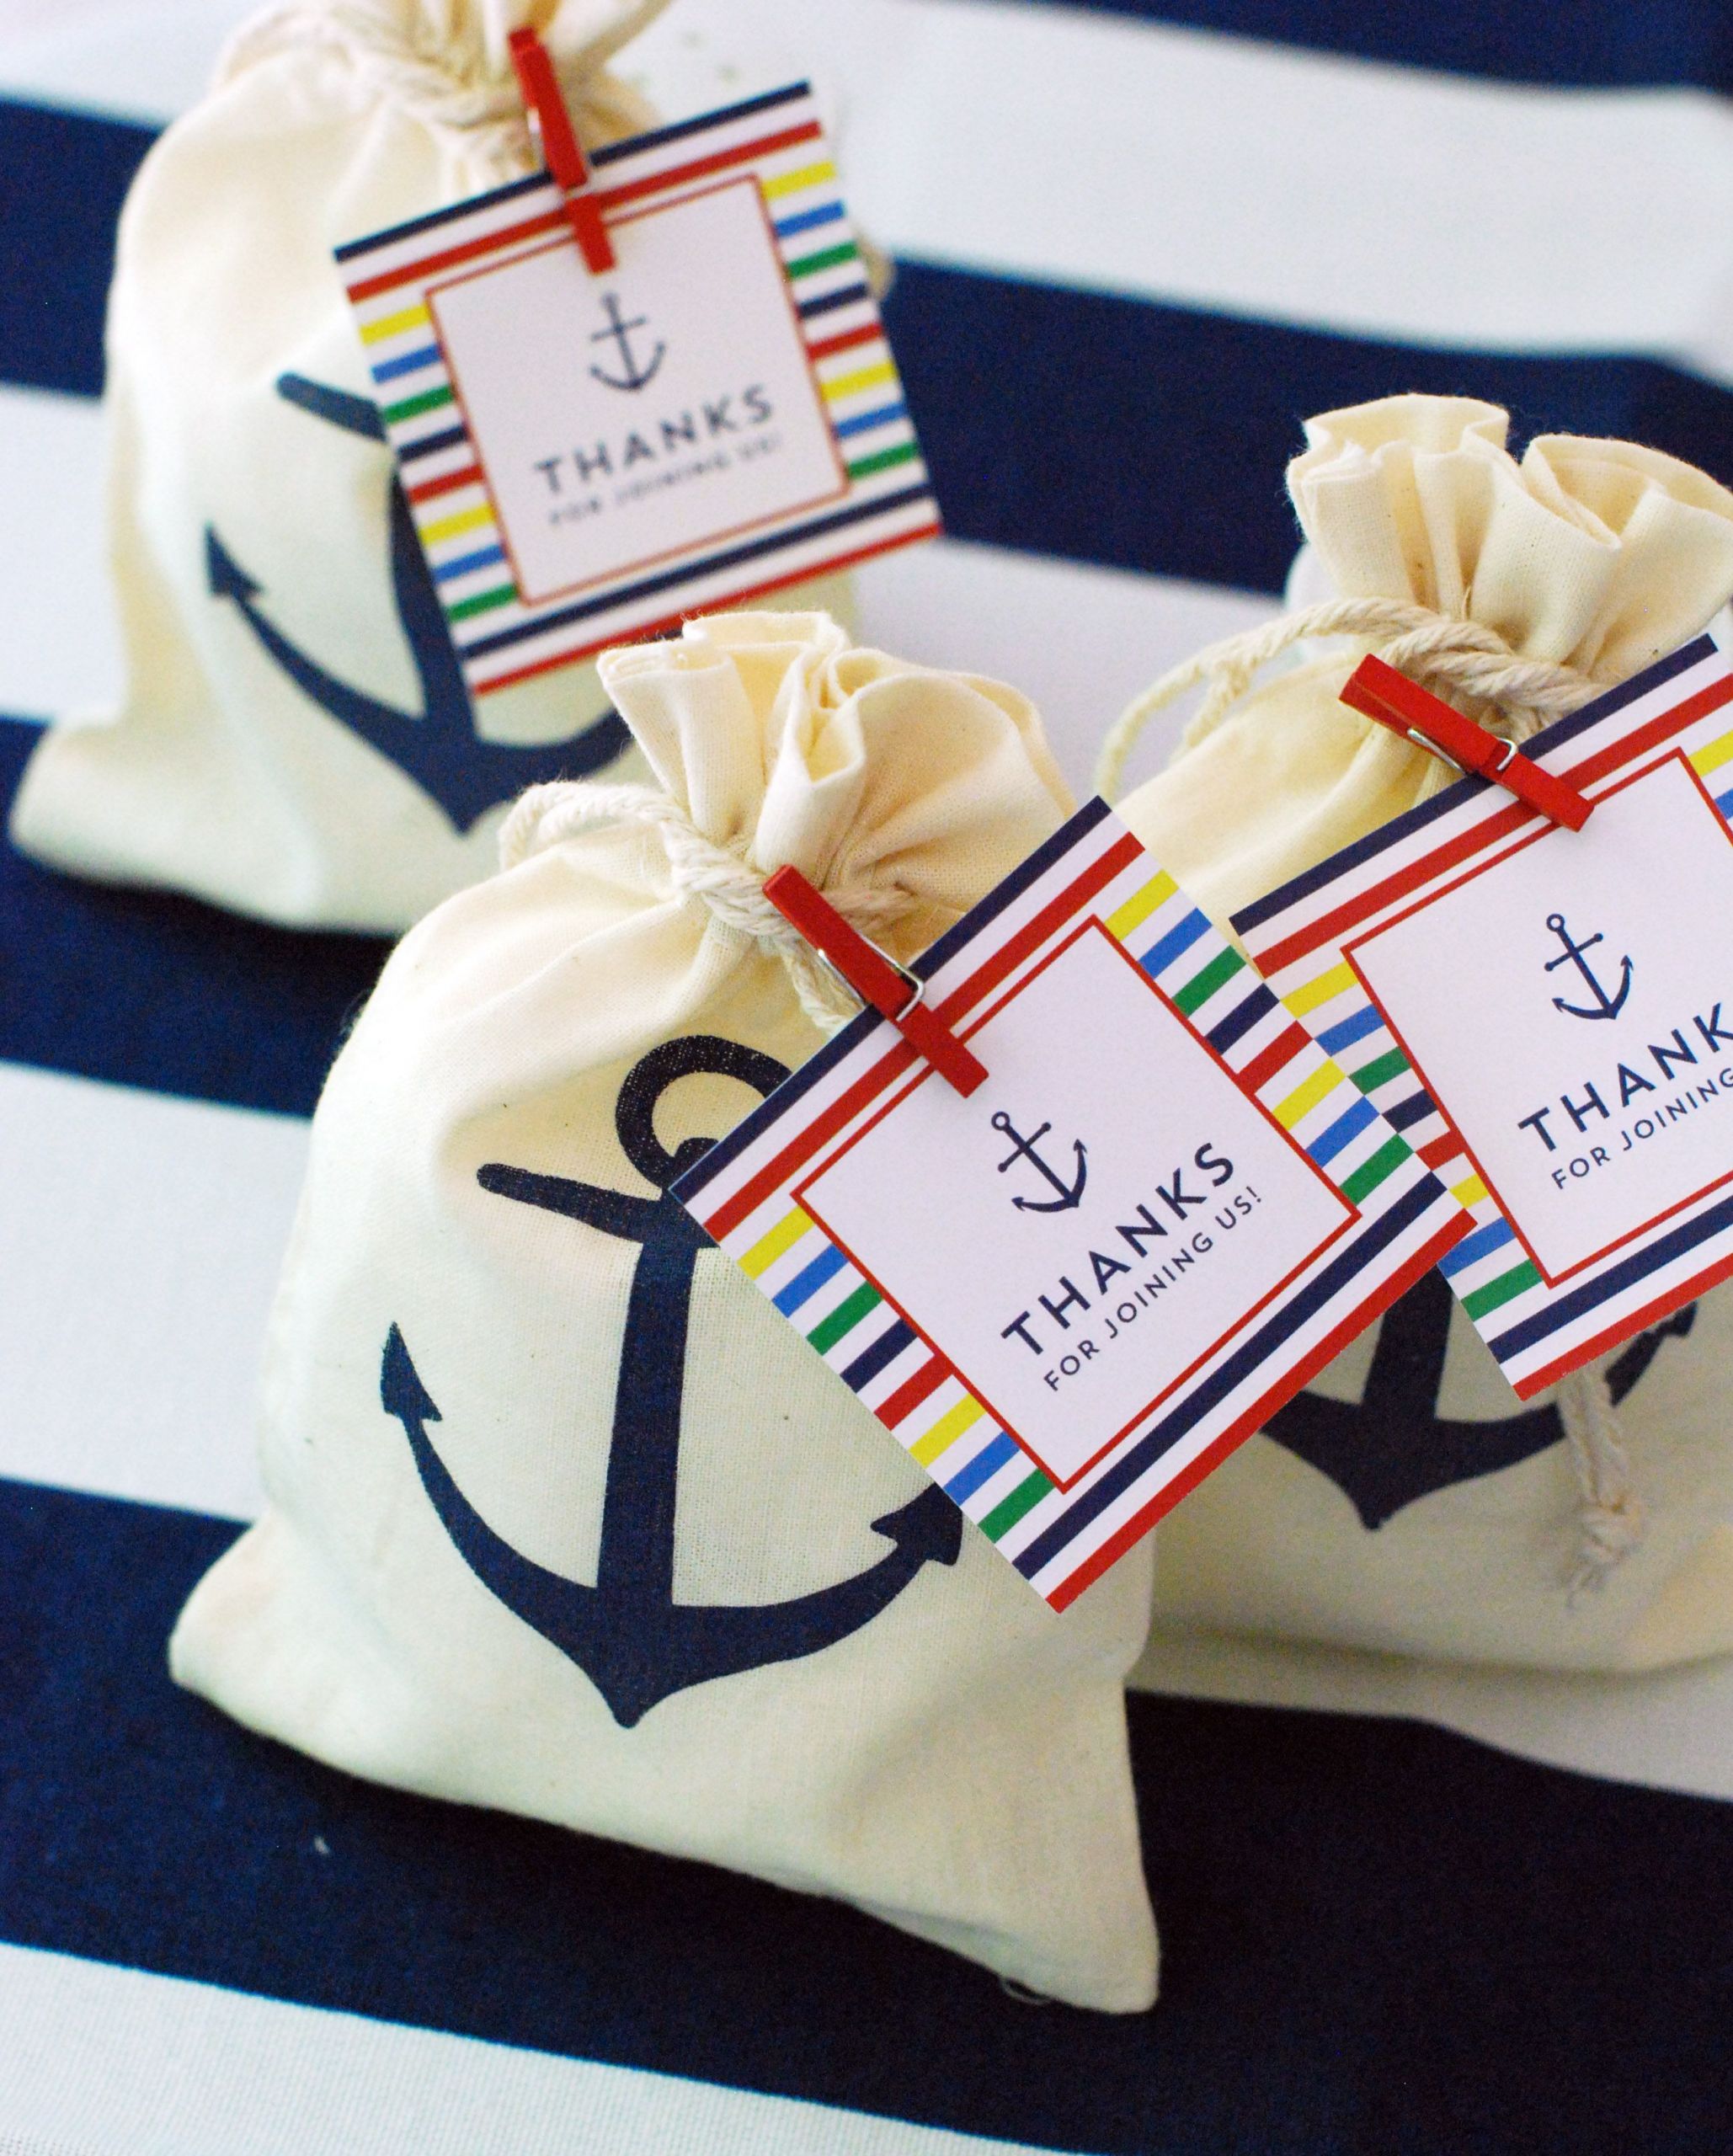 Nautical Themed Wedding Favors
 "Voyages" Anchor Muslin Favor Bag Set of 12